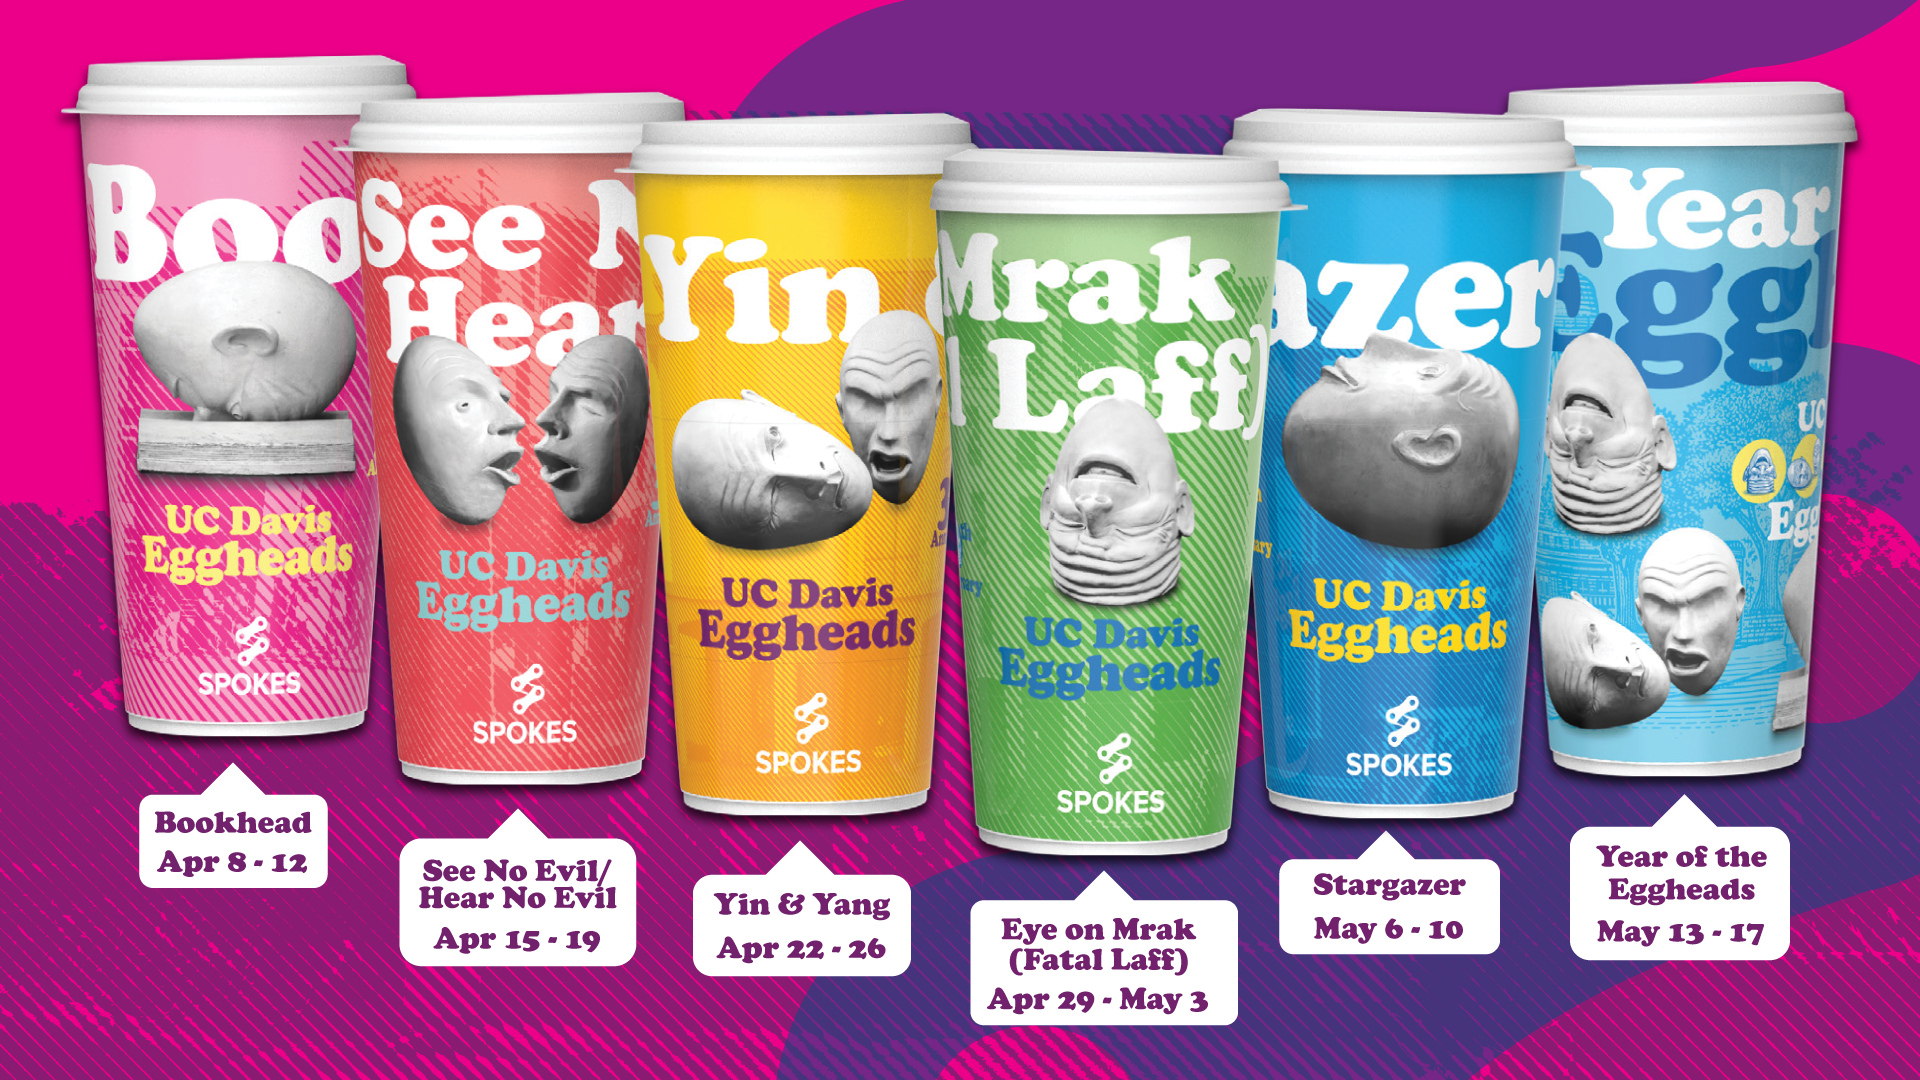 Collect all six Eggheads collectors cups while supplies last!